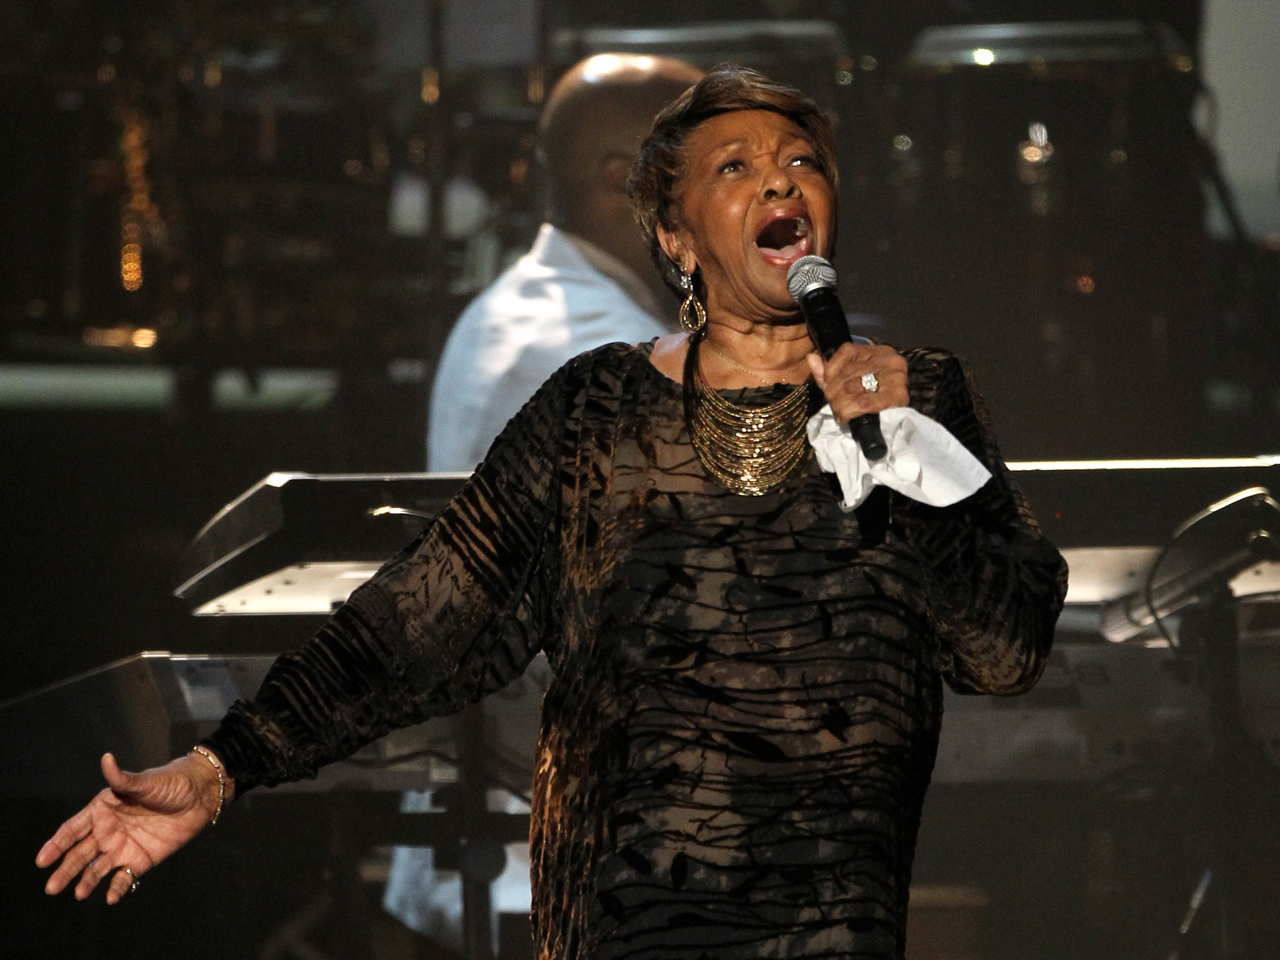 BET Awards 2012 sees Houston tributes, rampant obscenities - CBS News